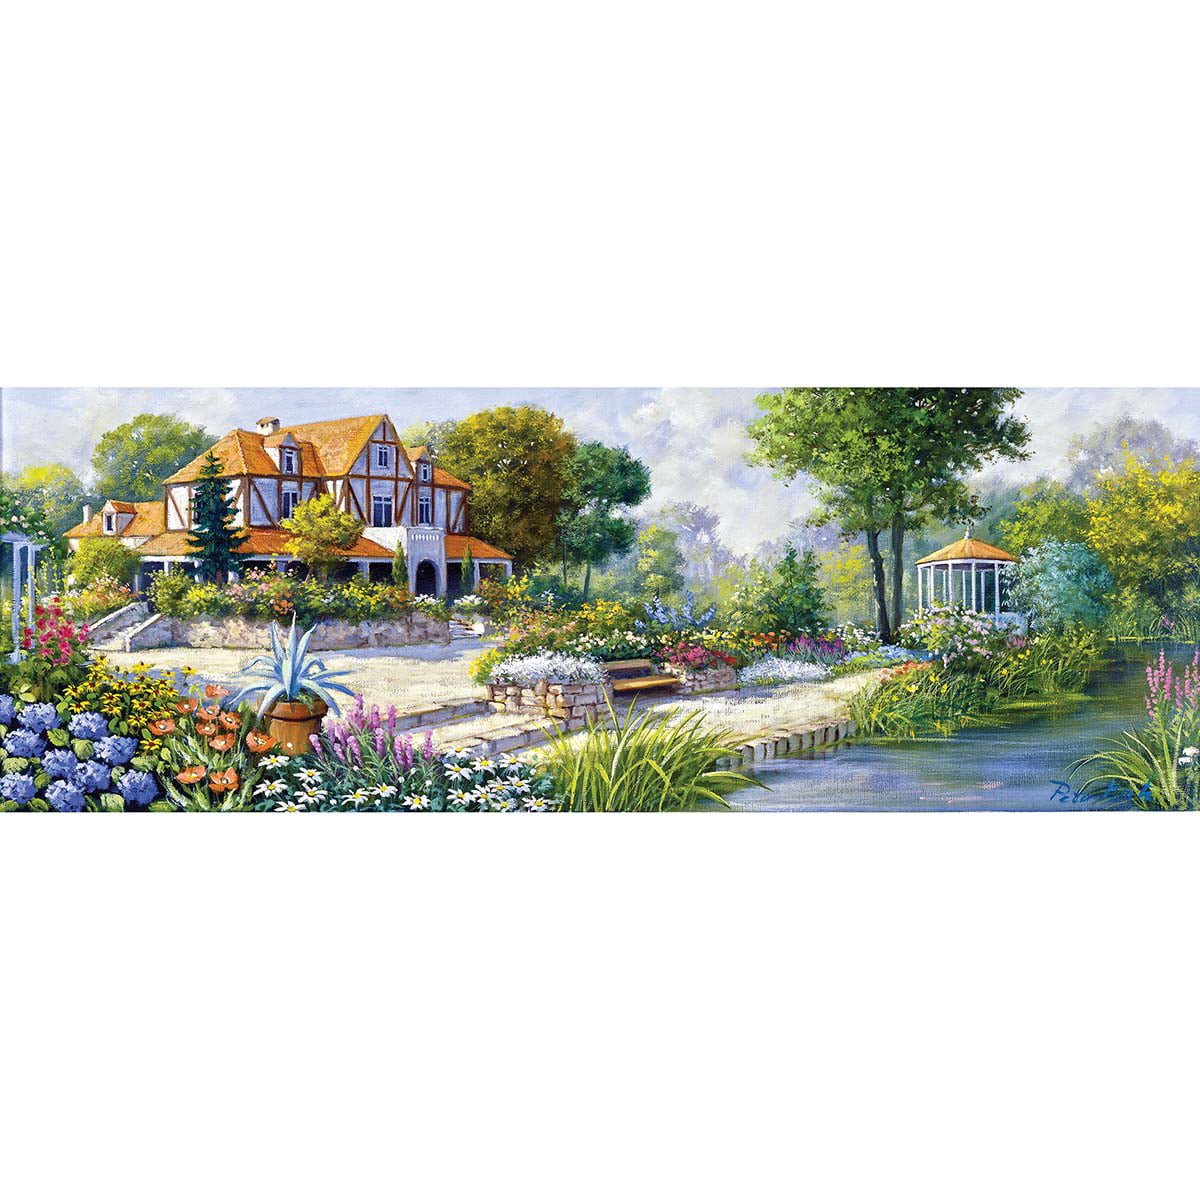 1000 Piece Jigsaw Puzzle England Cottage Landscapes USA shipping 